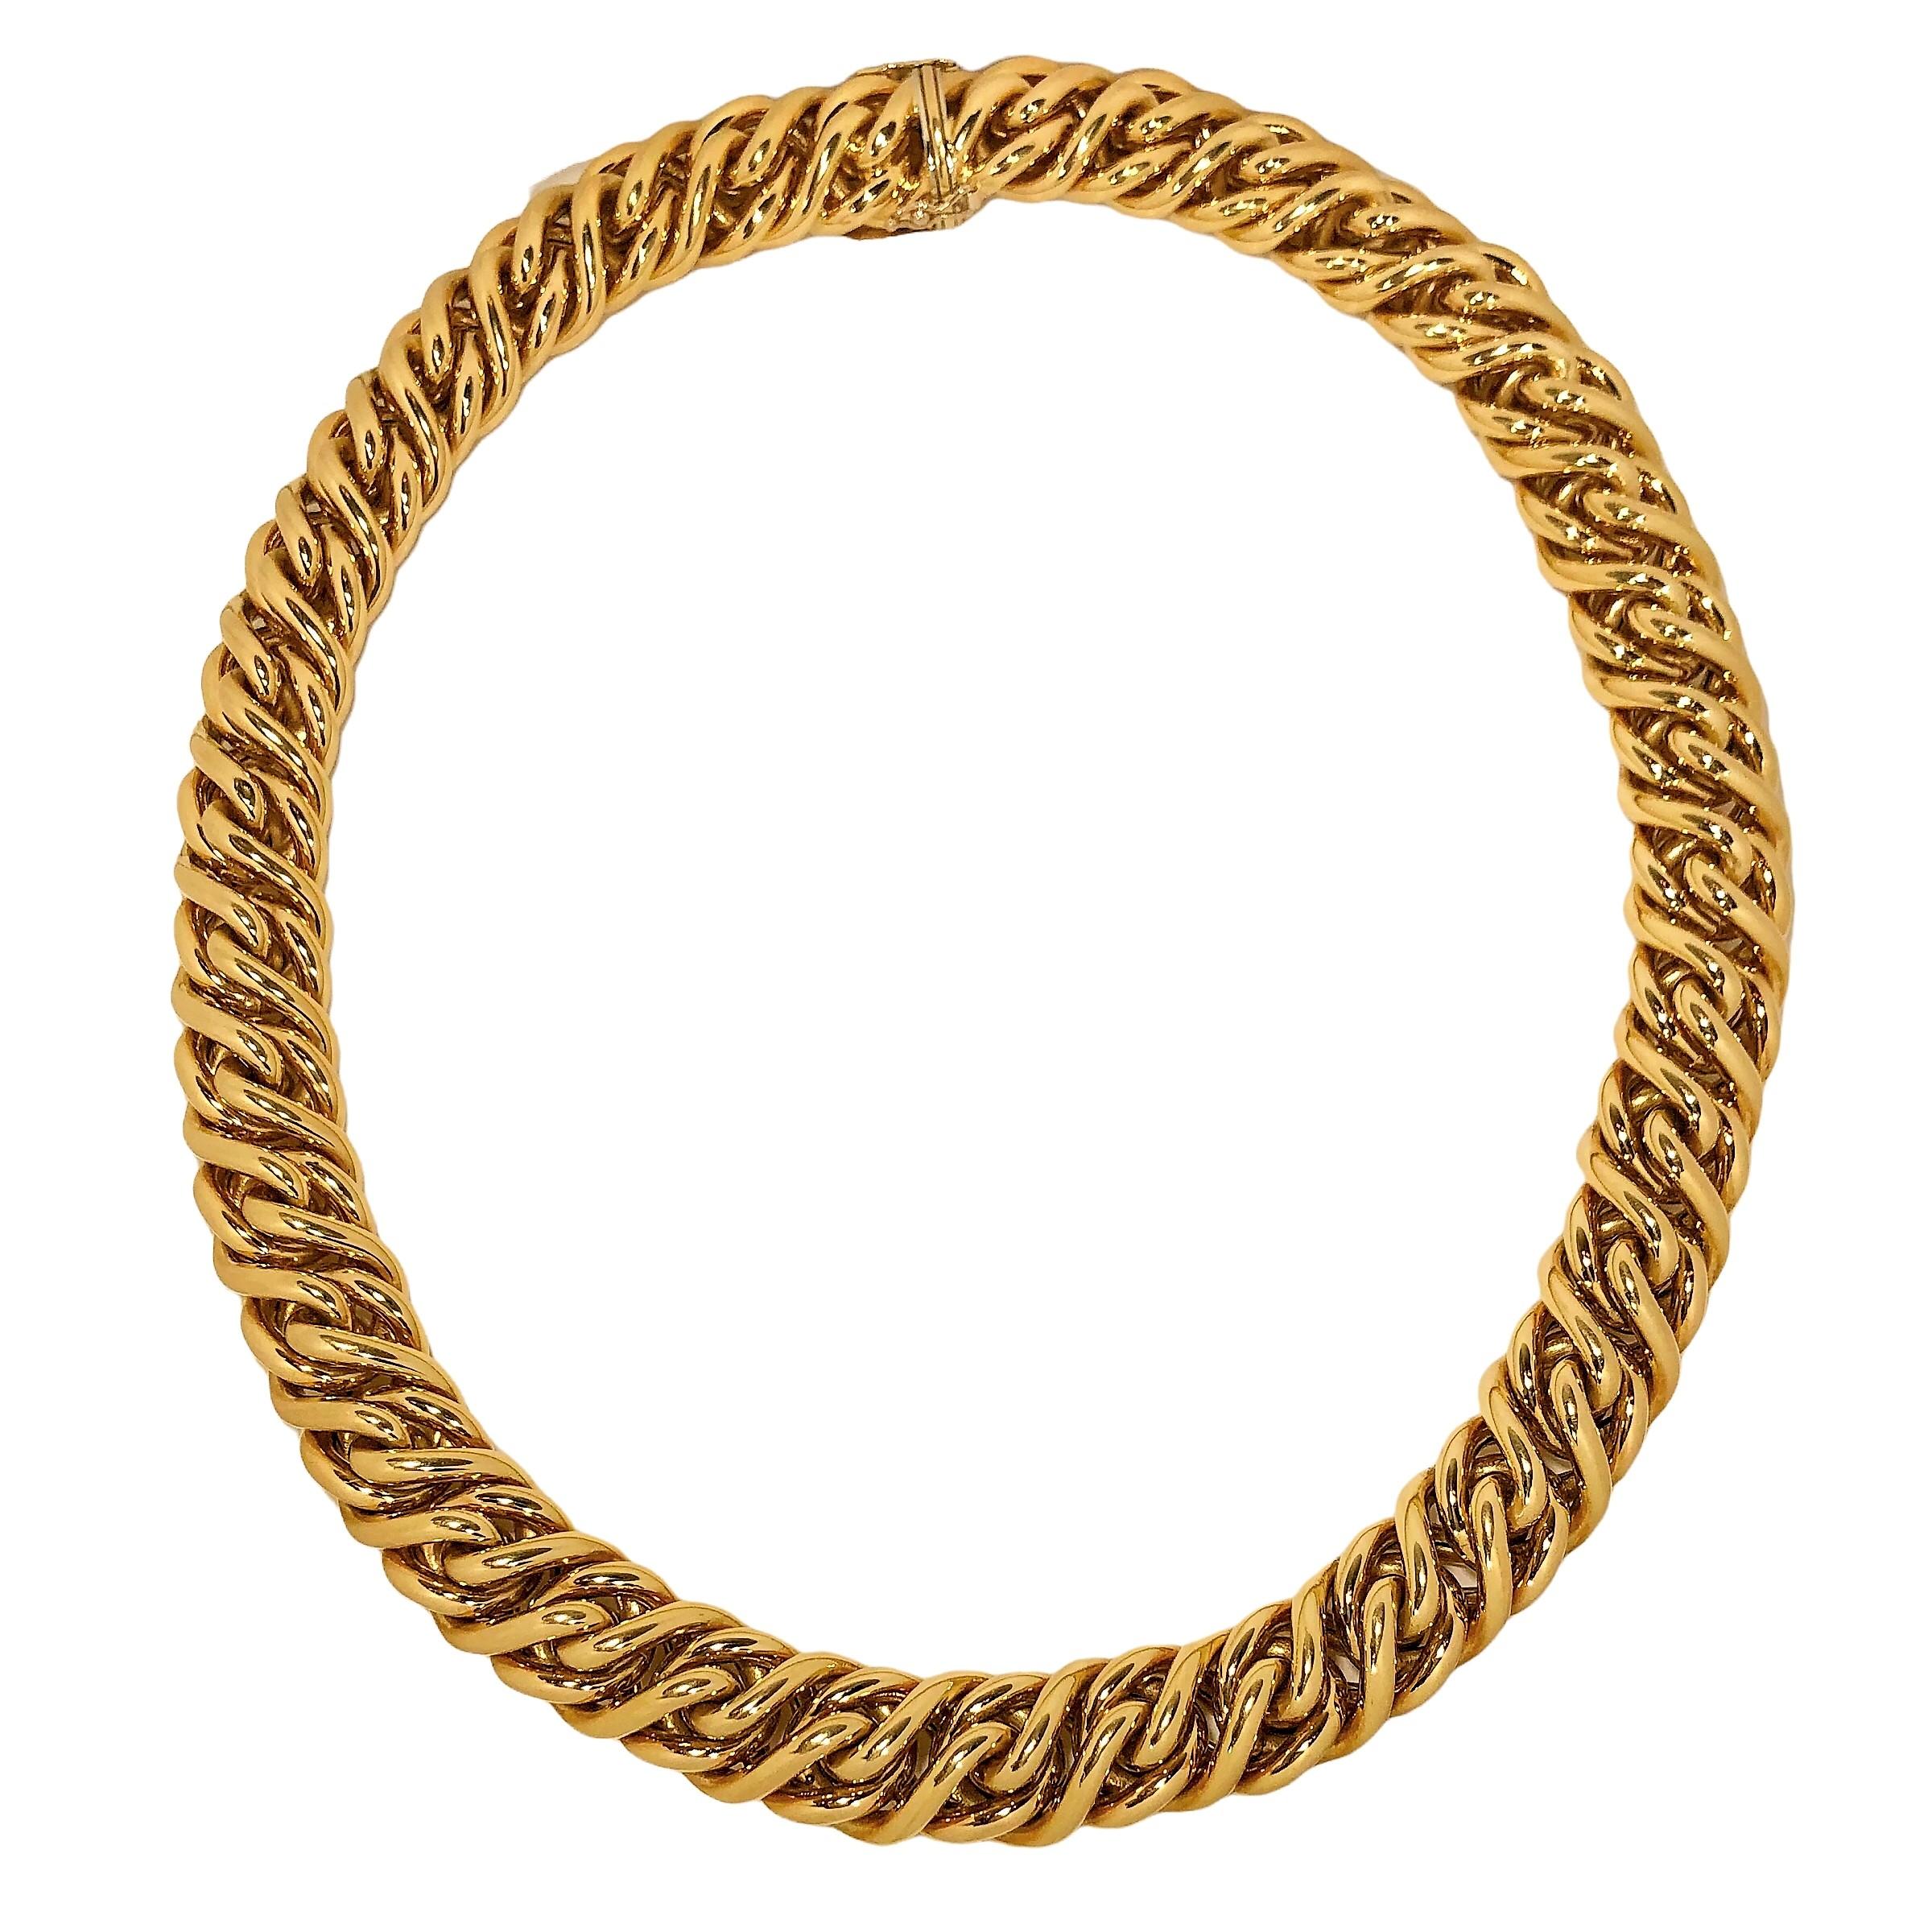 This lovely vintage Tiffany & Company Italian 18K yellow gold necklace consists of one continuous run of braided, heavy gauge 18k tubing. It is quite wide, measuring 9/16 inches in width and is very dimensional, with a height of over 3/8 inches.